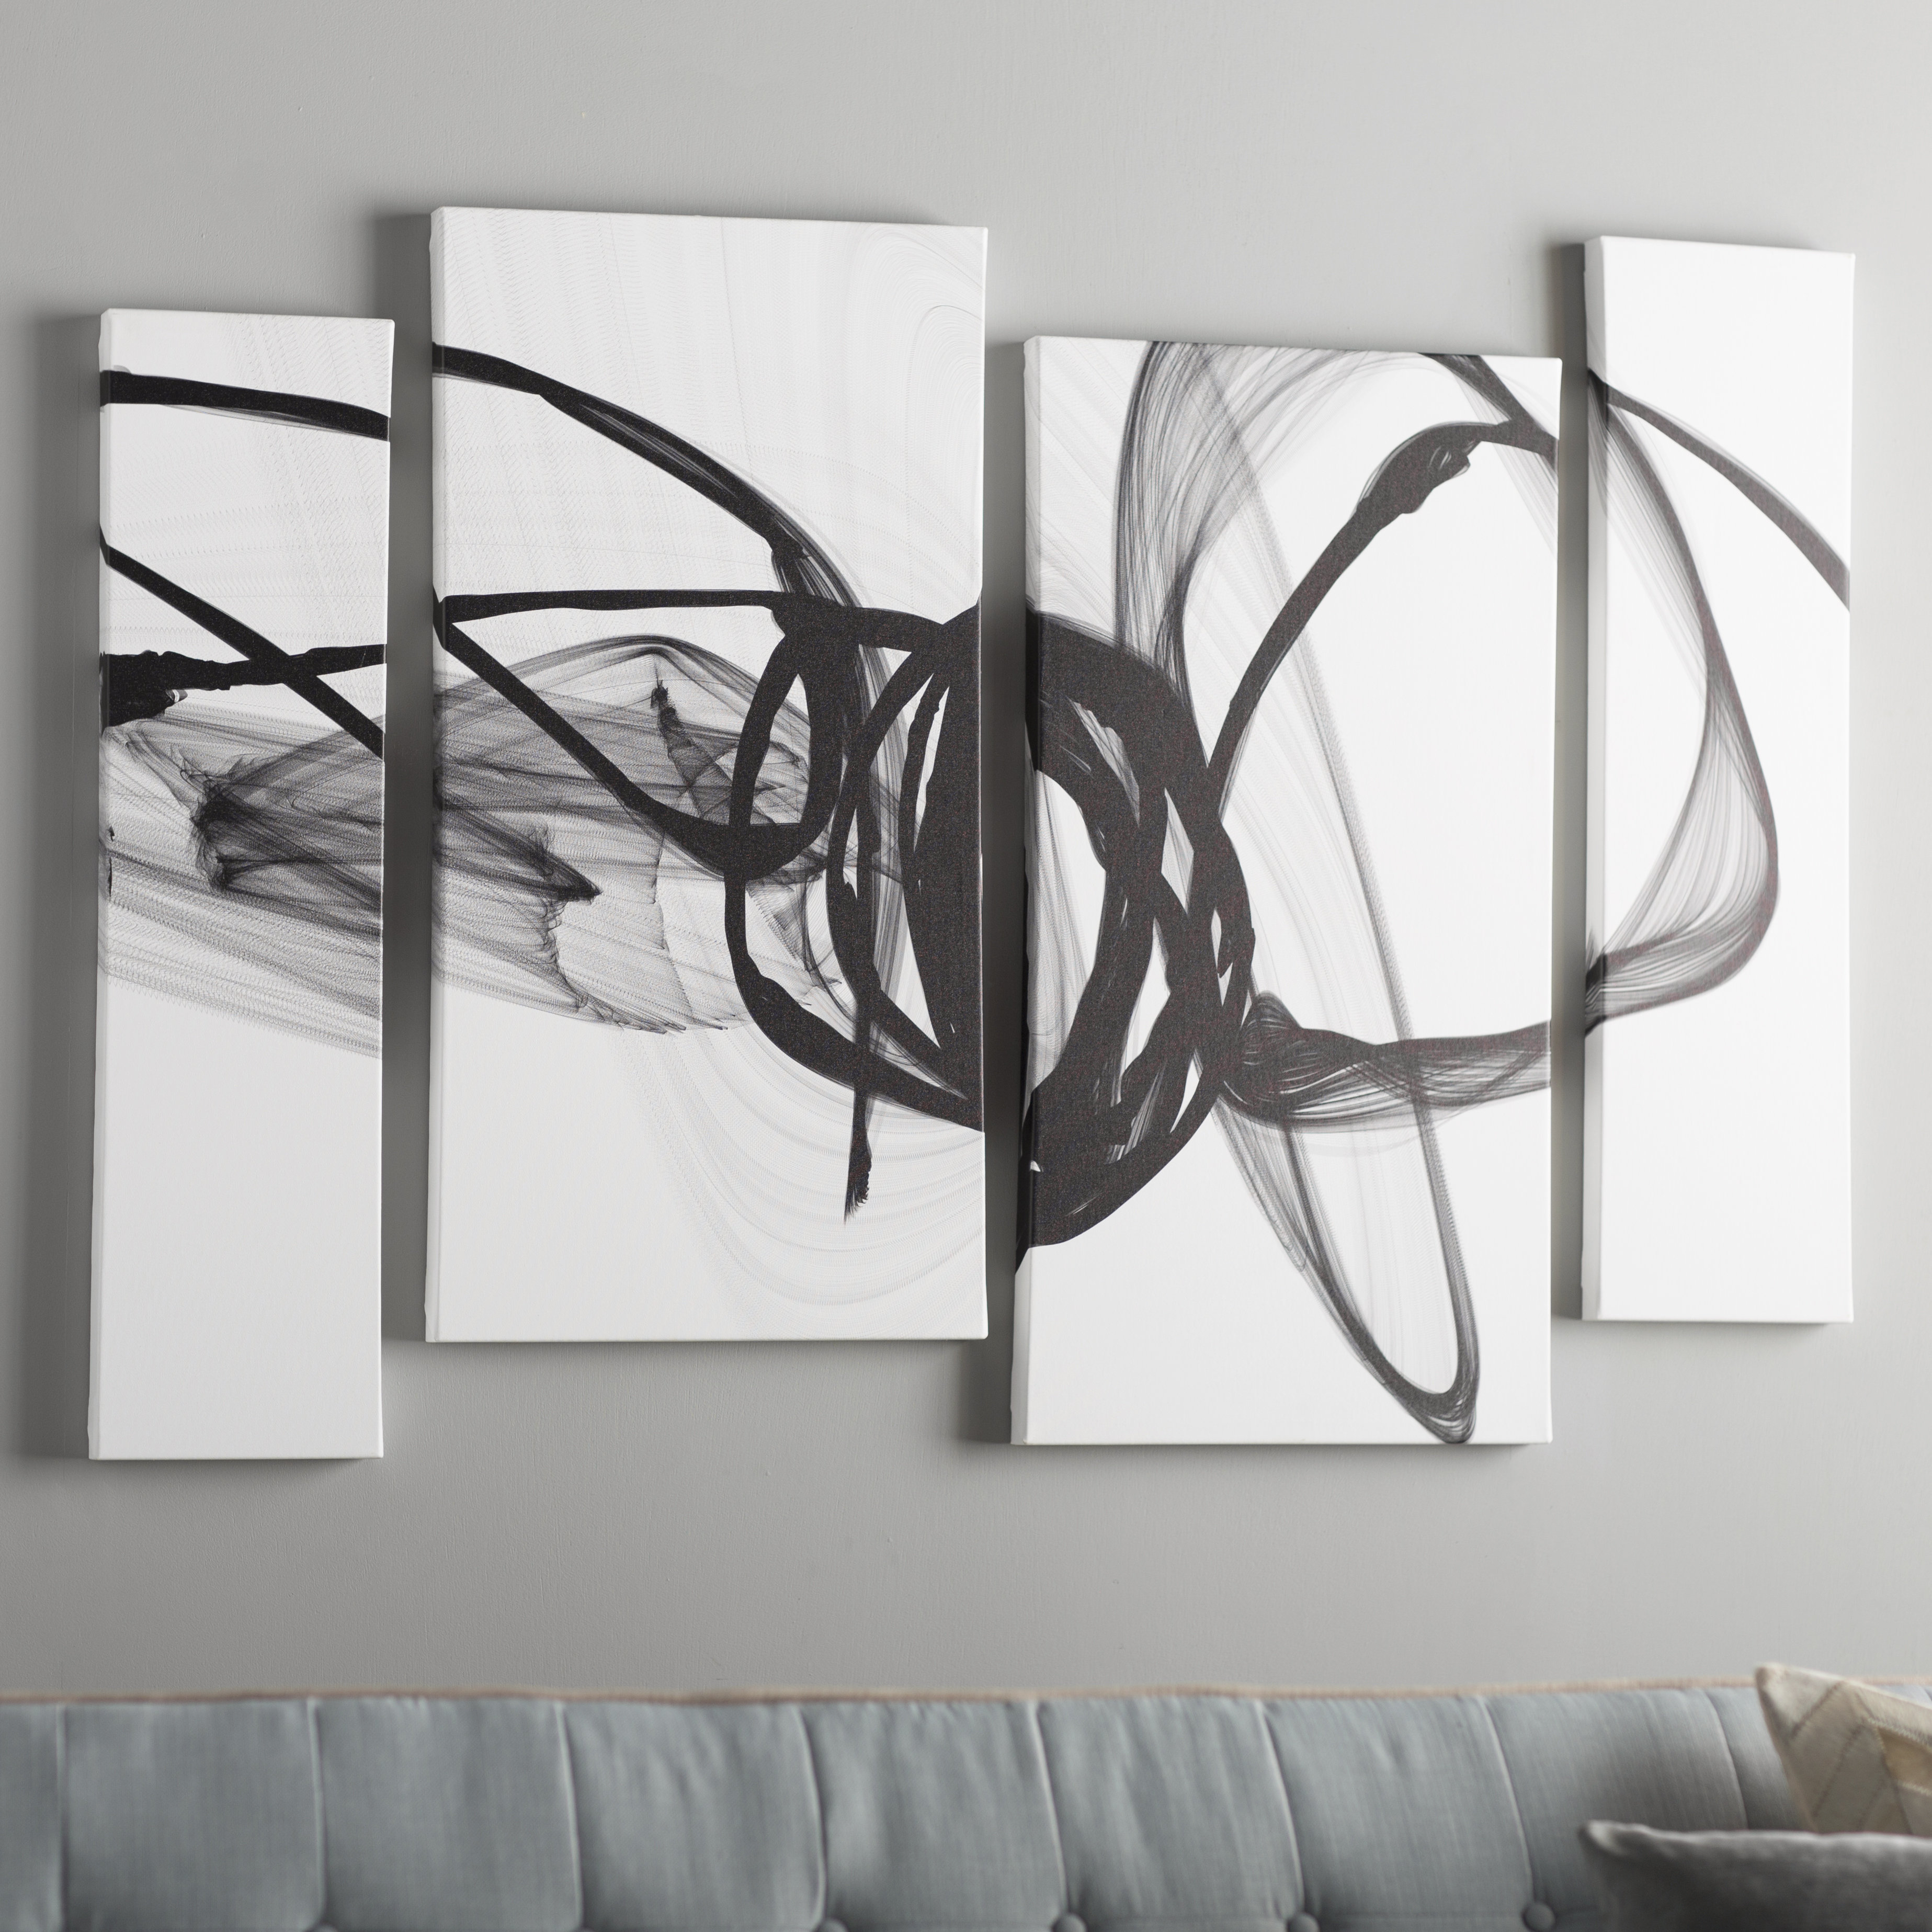 That Energy By Irena Orlov 4 Piece Graphic Art On Wrapped Canvas Set - 